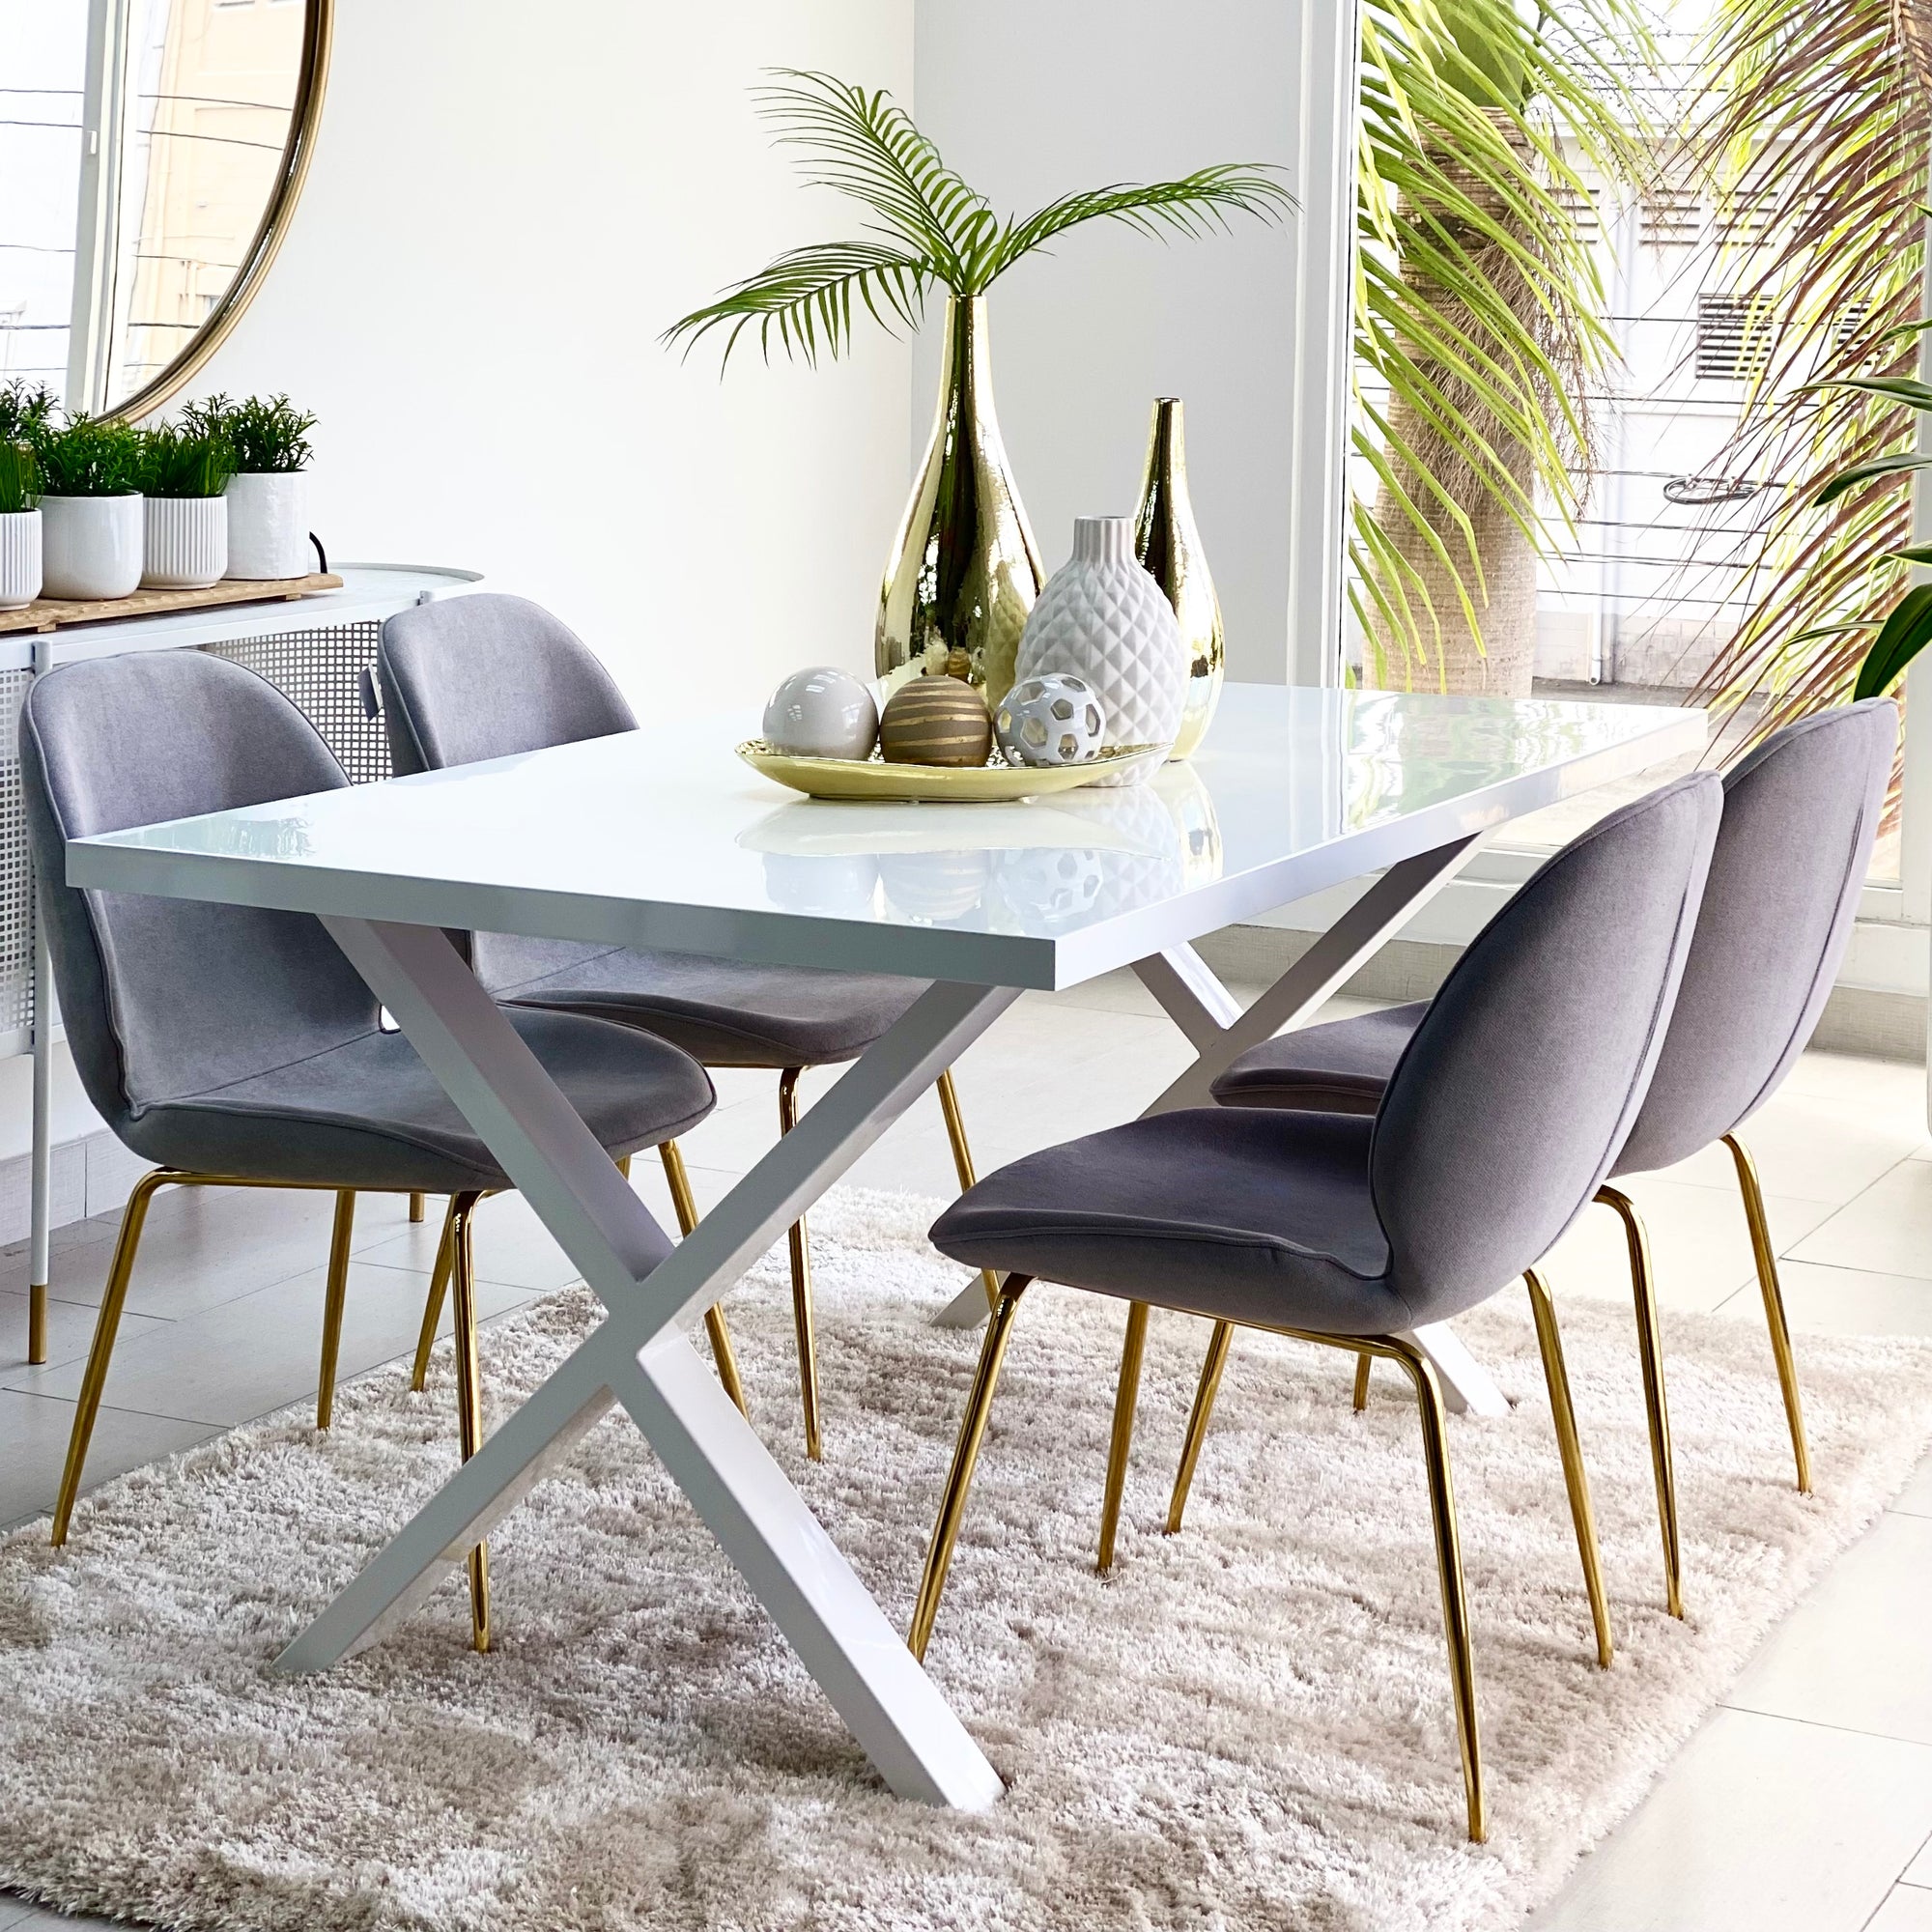 Criss Cross Dining Table White Top White Legs